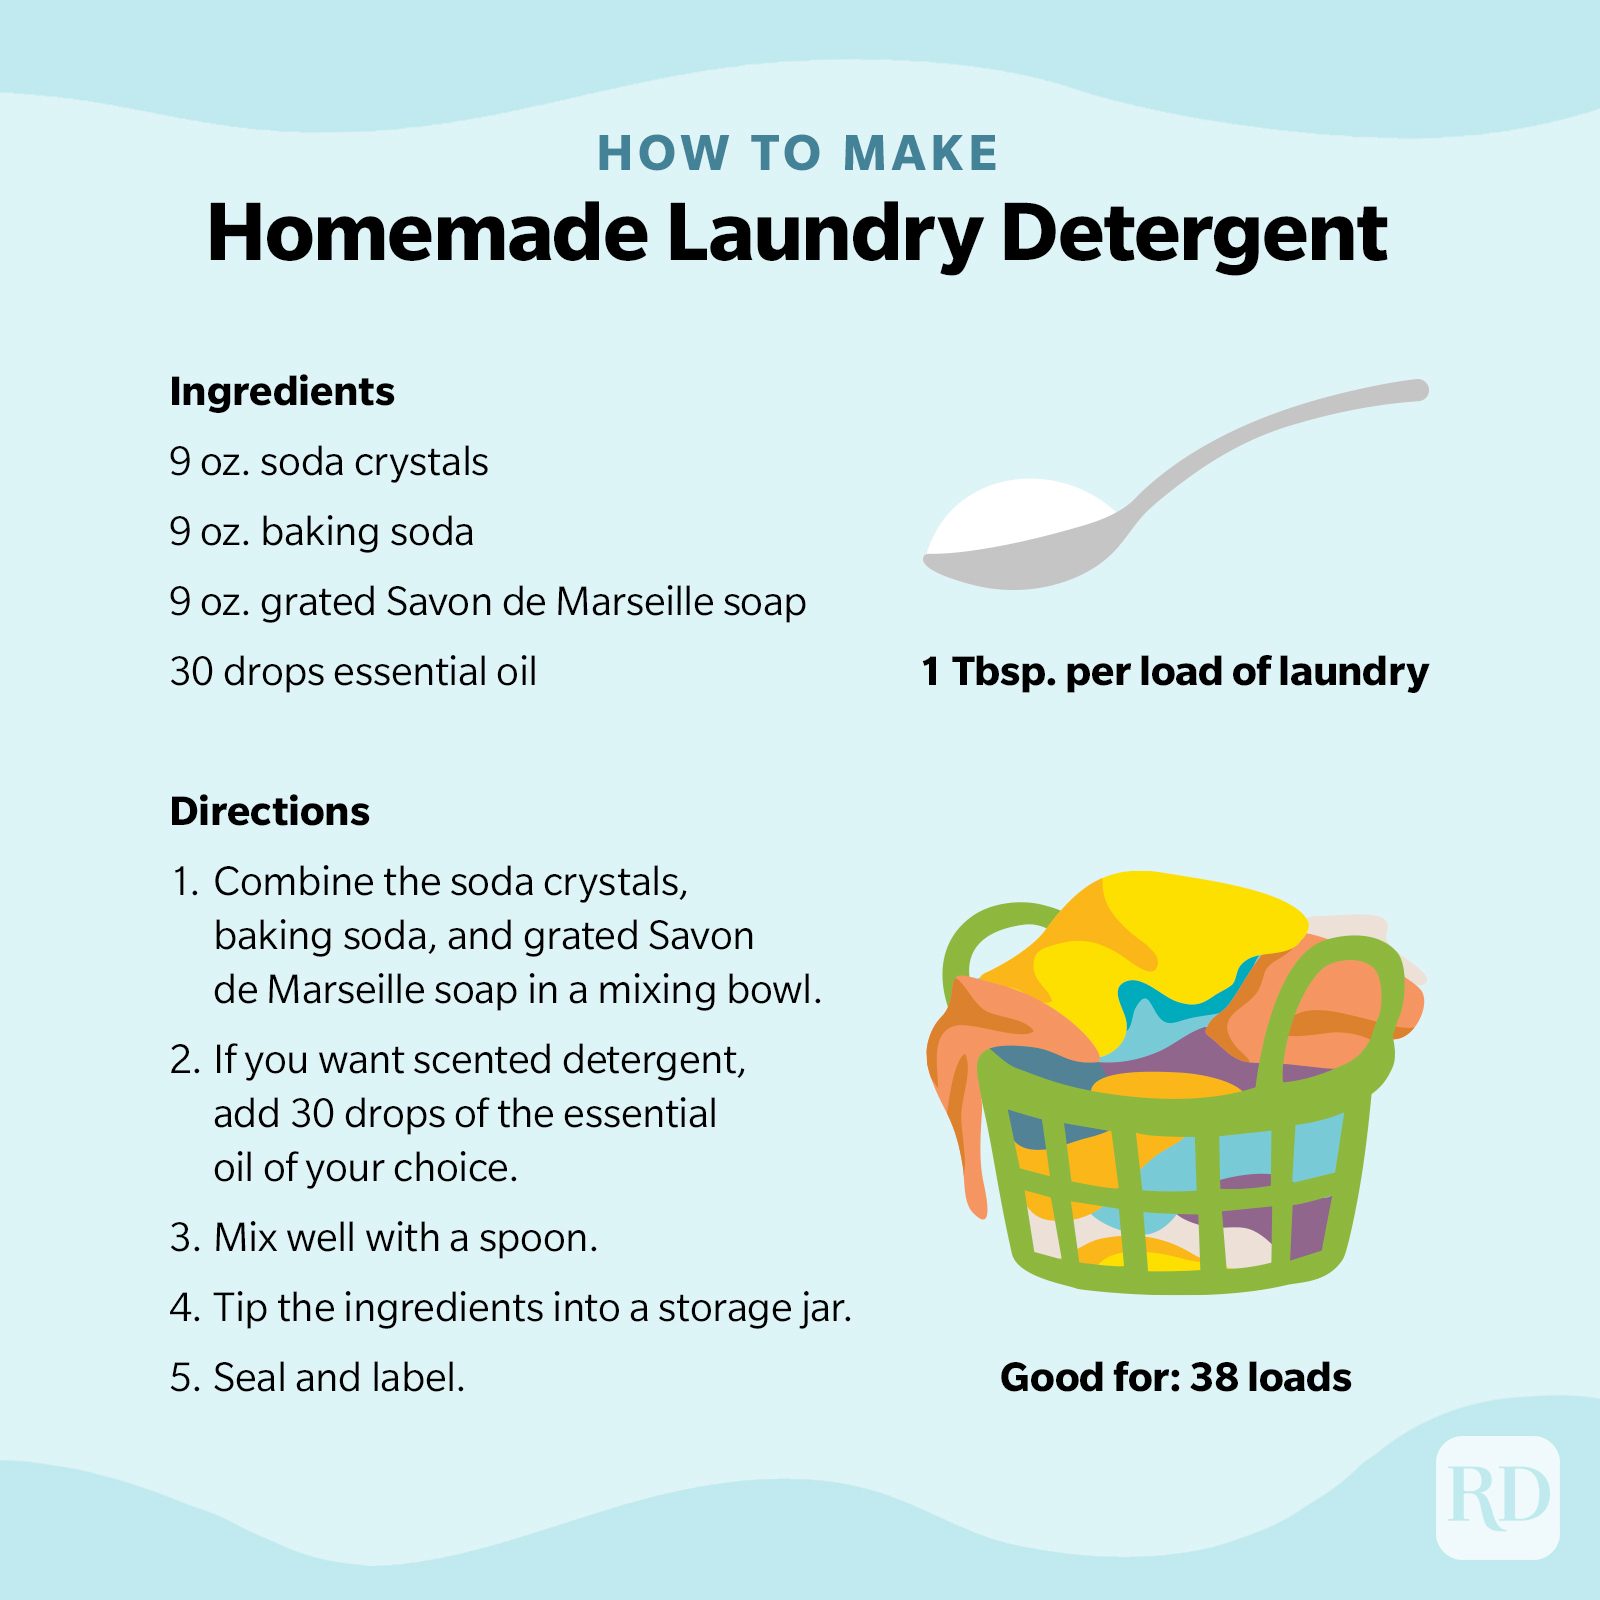 Homemade Non-Toxic Laundry Detergent with Essential Oils 